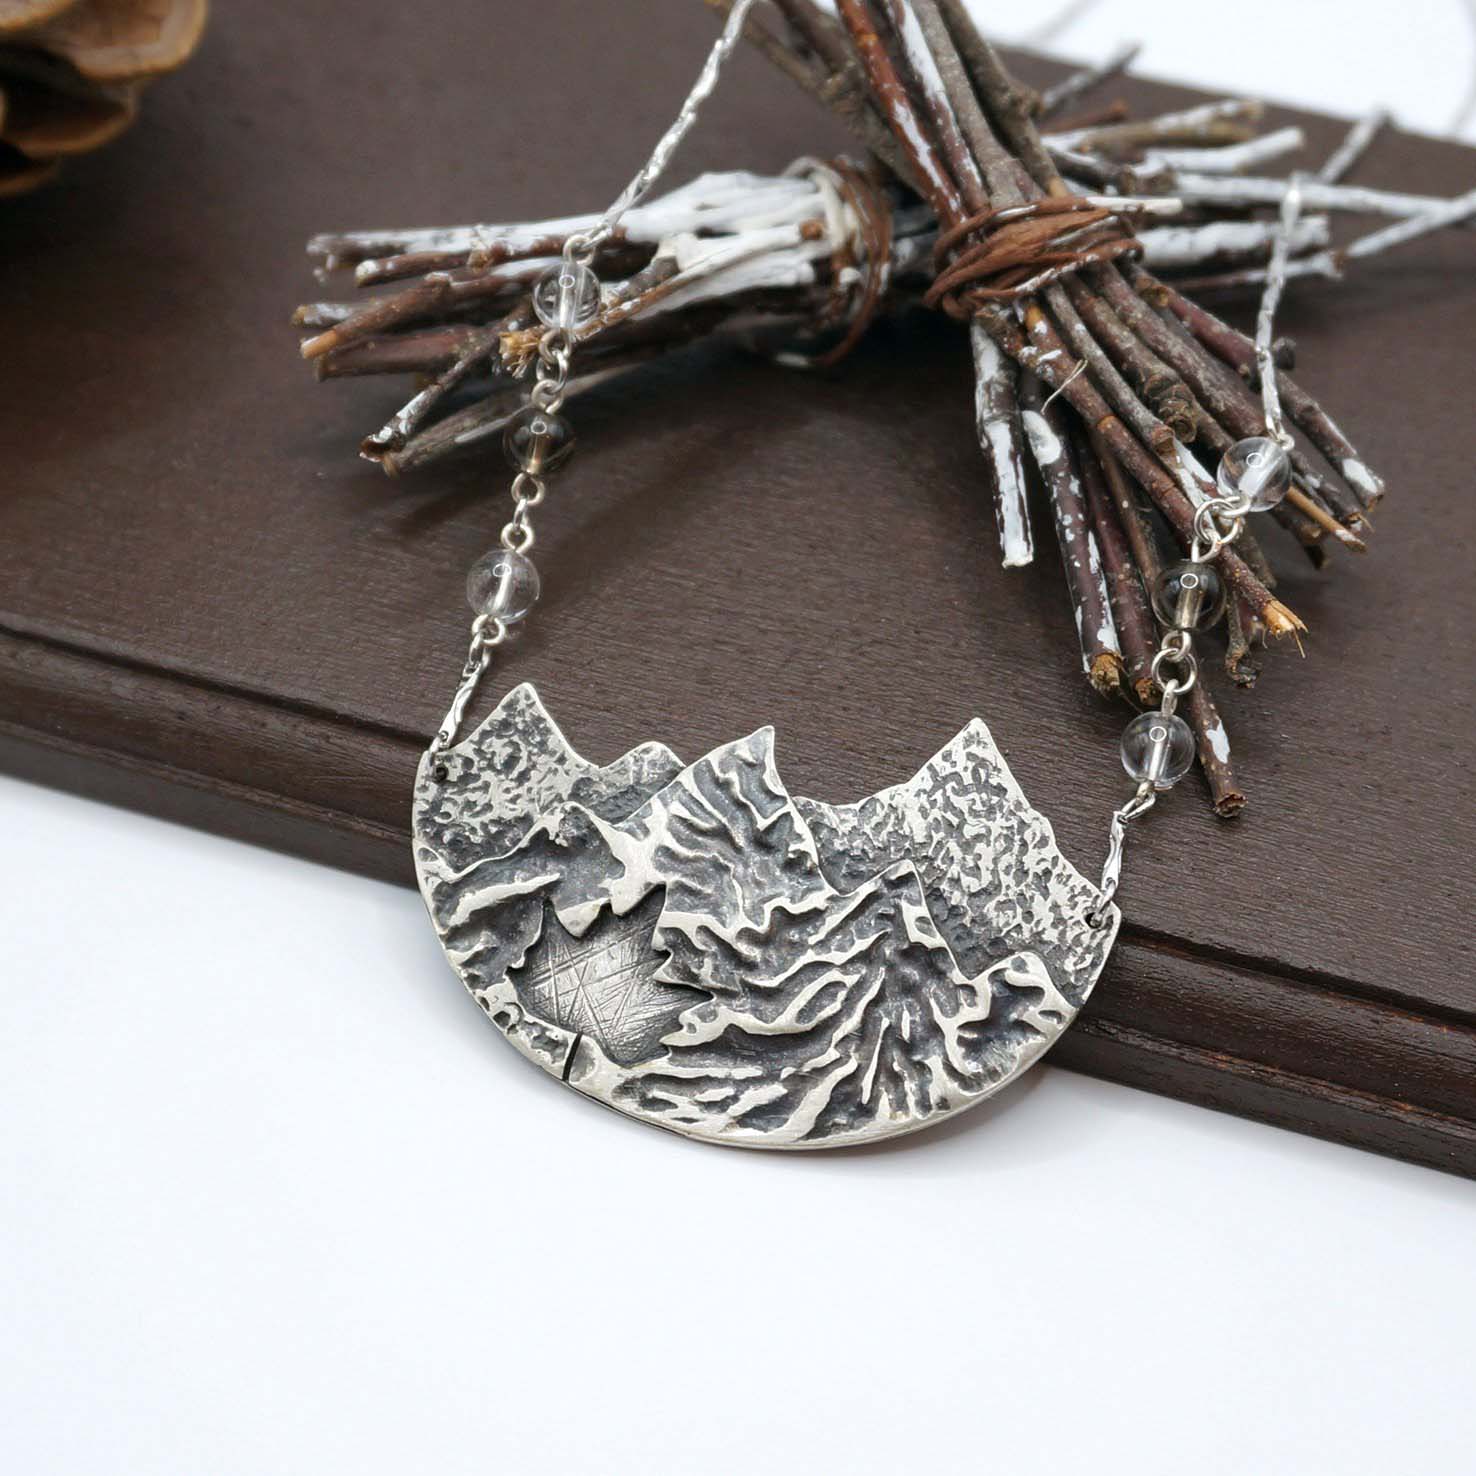 Silver necklace with mountains on a wooden platform with bundles of twigs